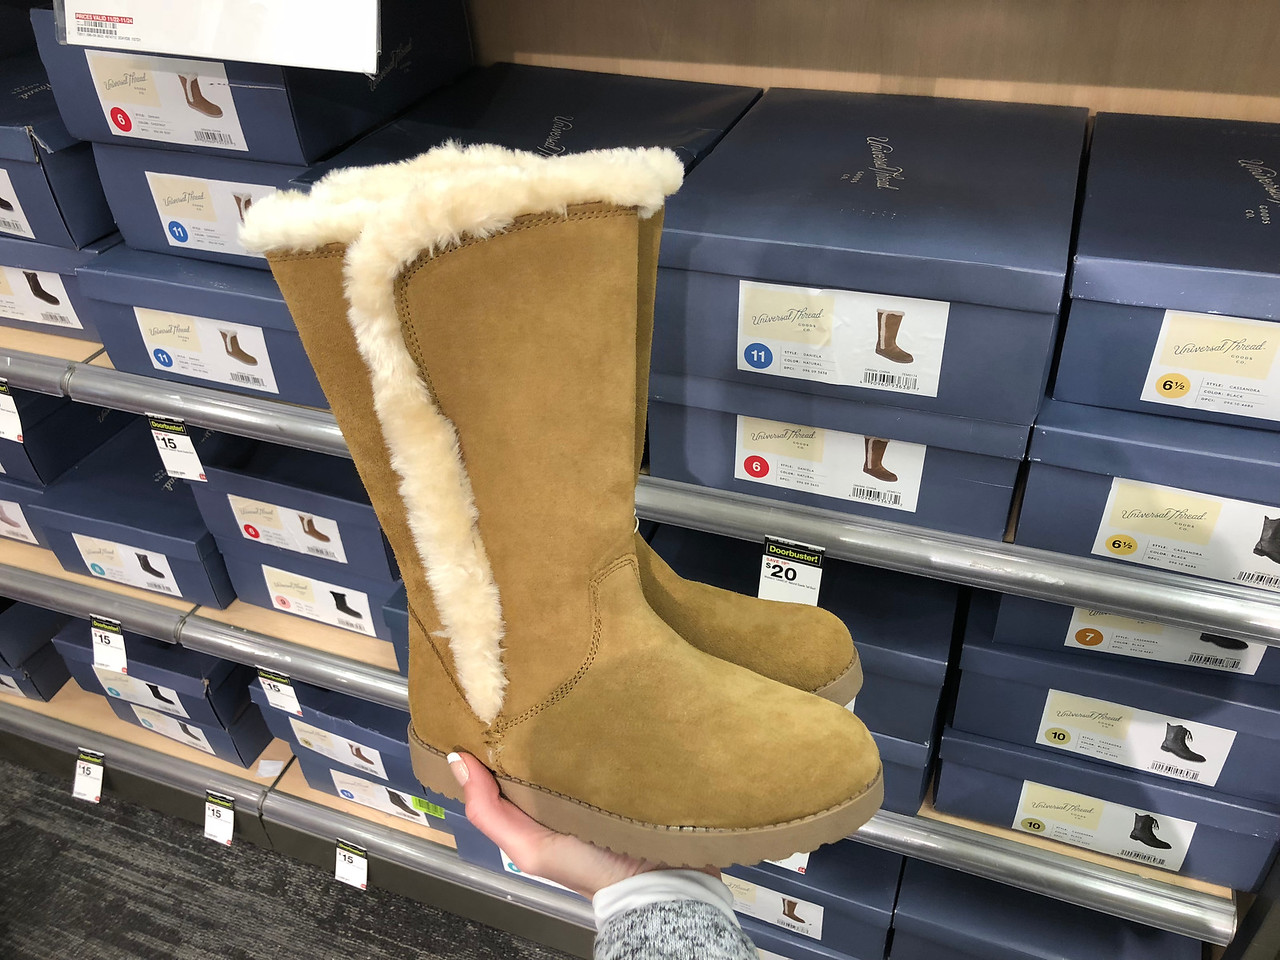 $15 boots